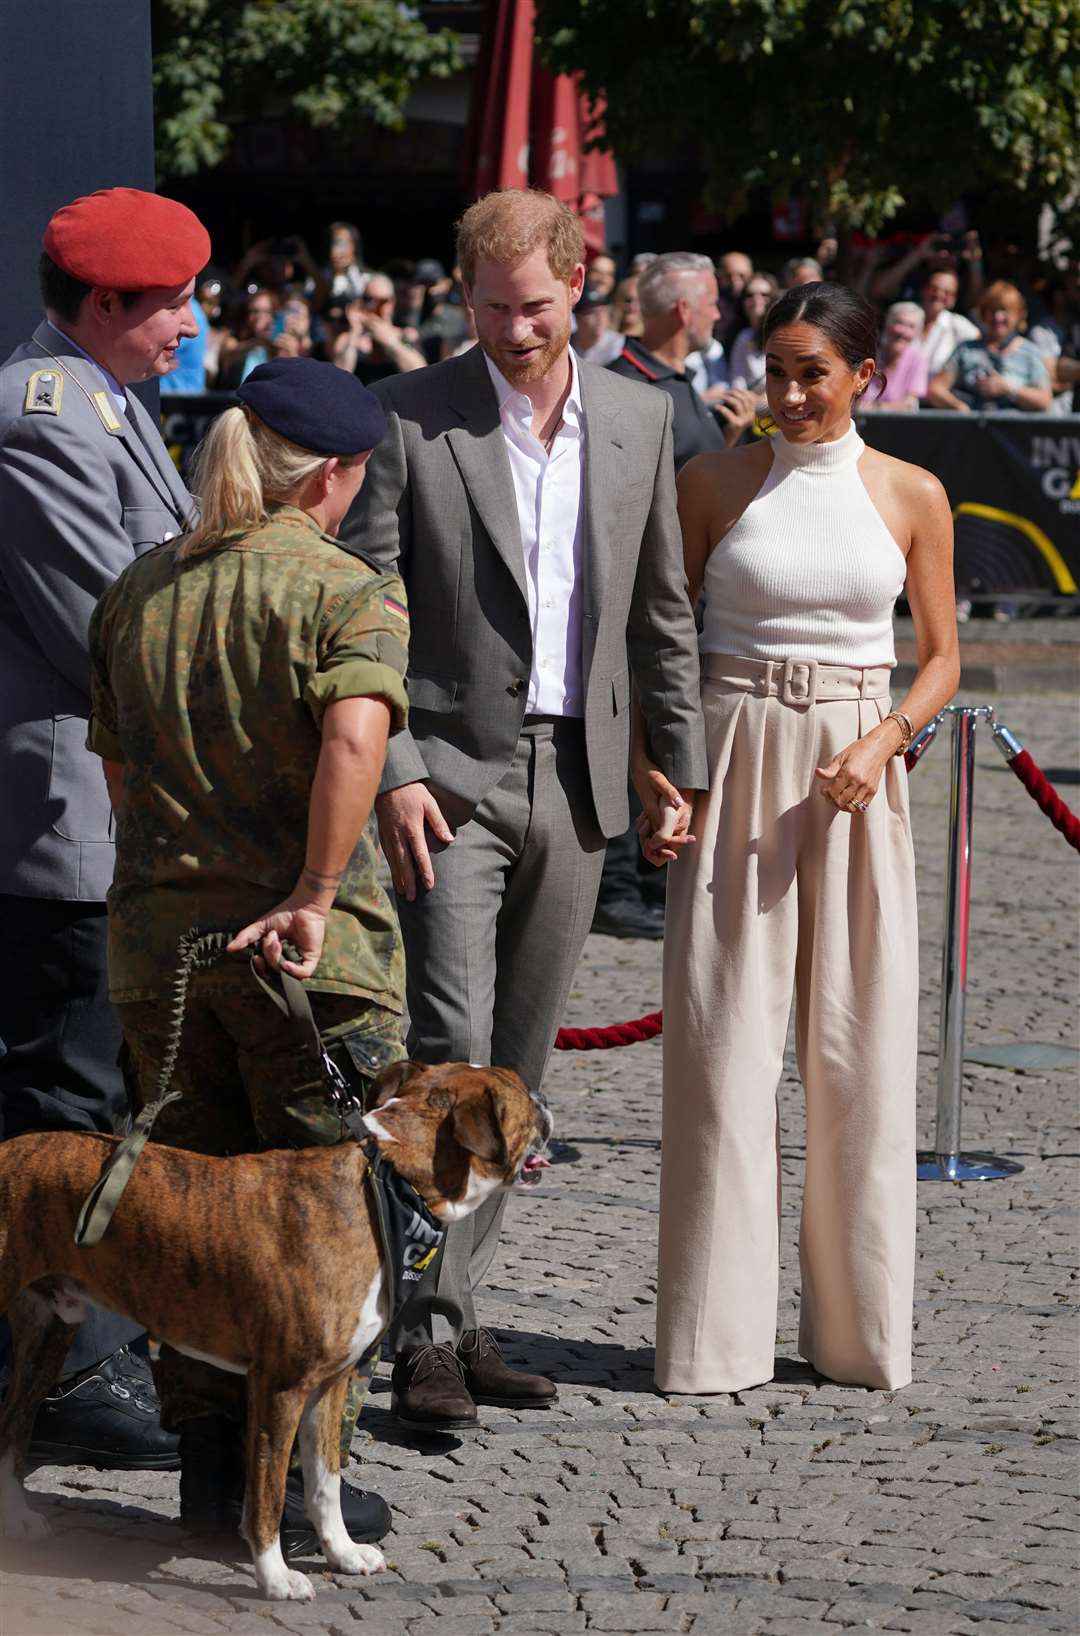 The Duke and Duchess of Sussex arrive at City Hall in Dusseldorf (Joe Giddens/PA)